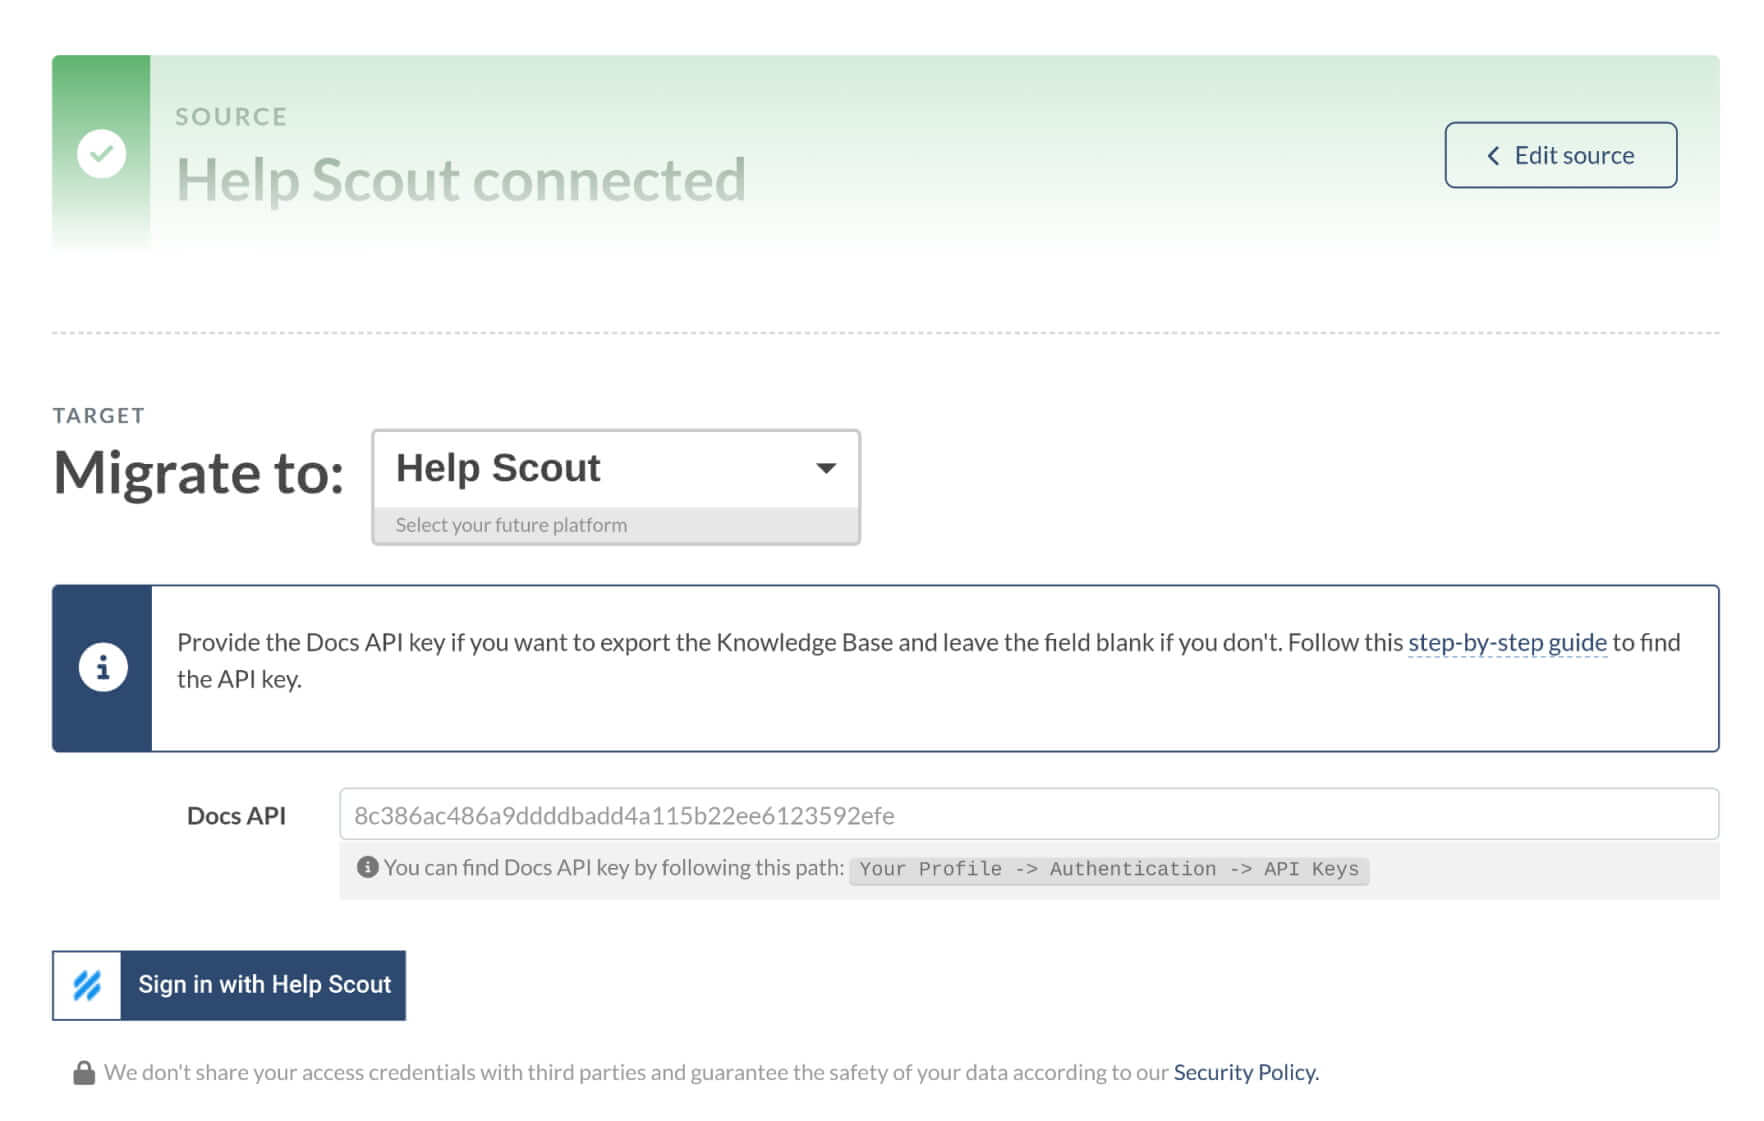 Help Scout Target - Migration Wizard